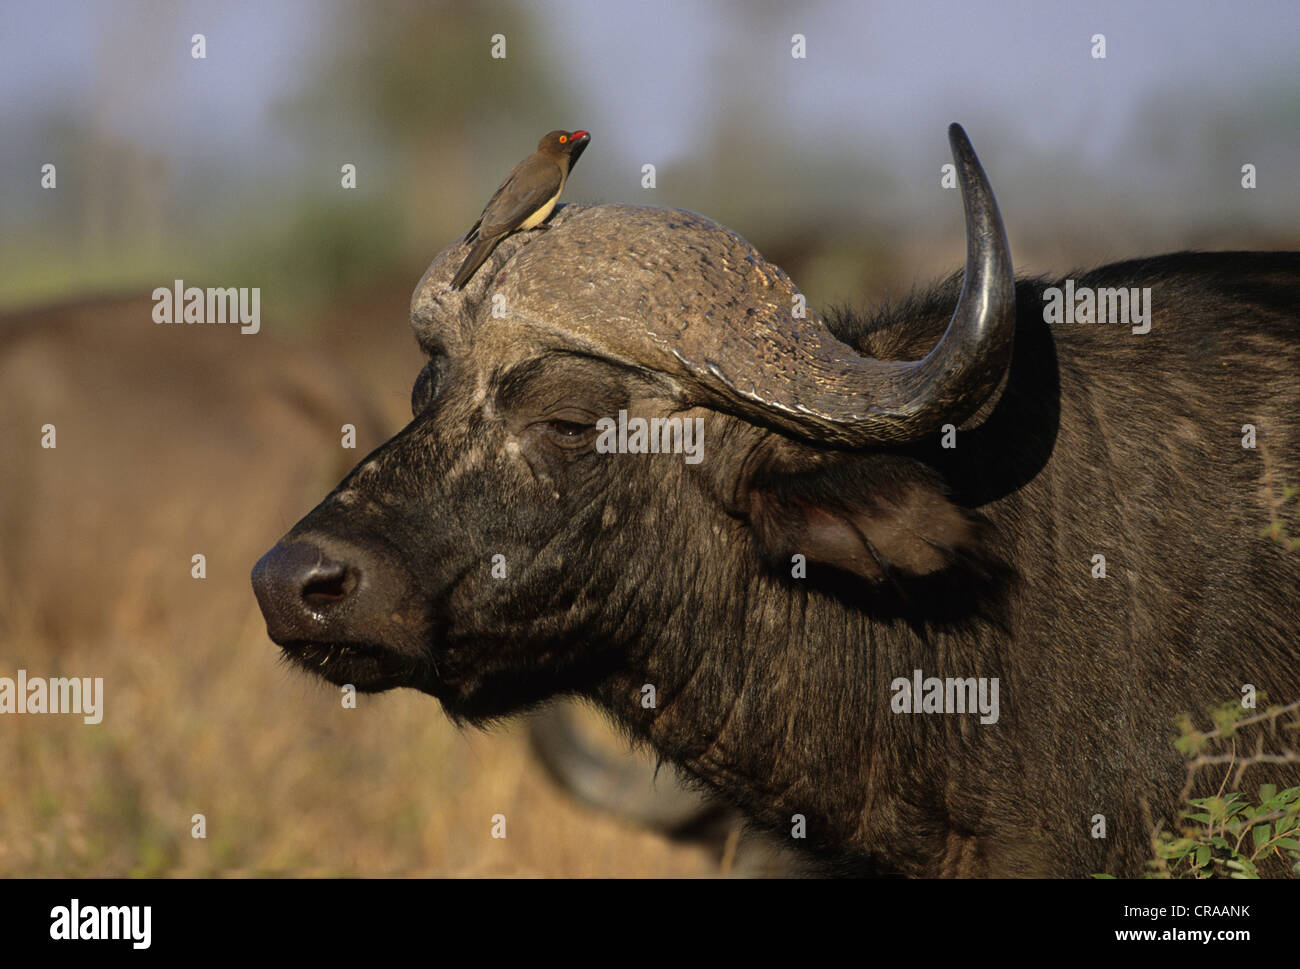 Cape Buffalo (Syncerus caffer), with oxpecker (Buphagus africanus), Kruger National Park, South Africa Stock Photo